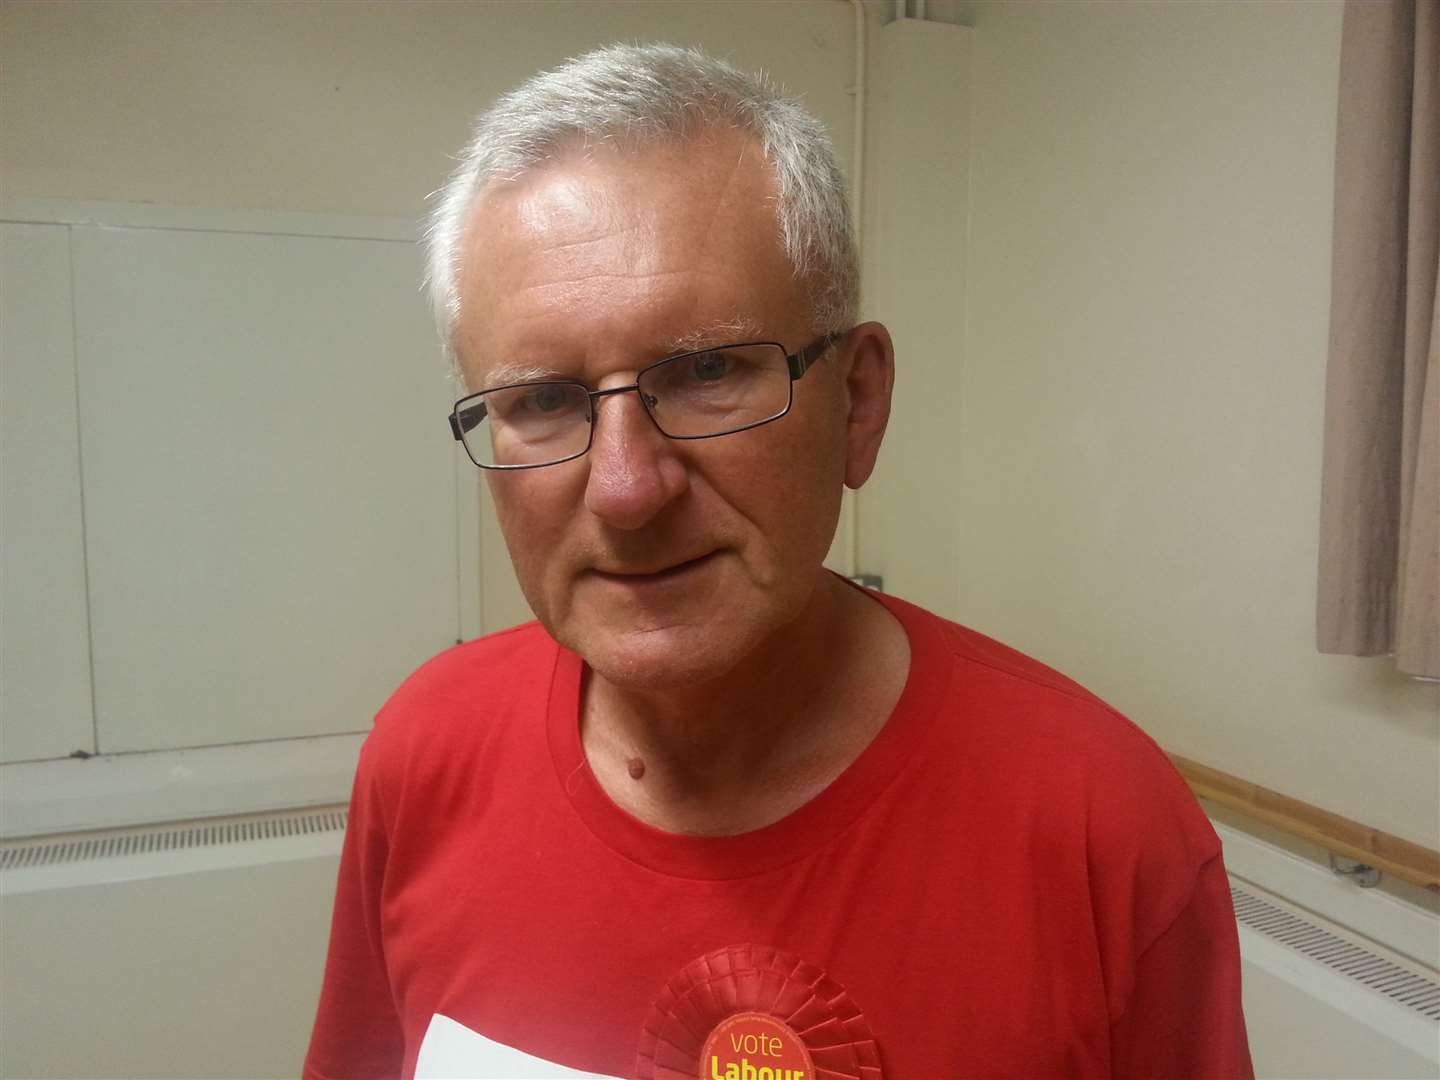 Keith Adkinson has resigned from the party over mystery suspension